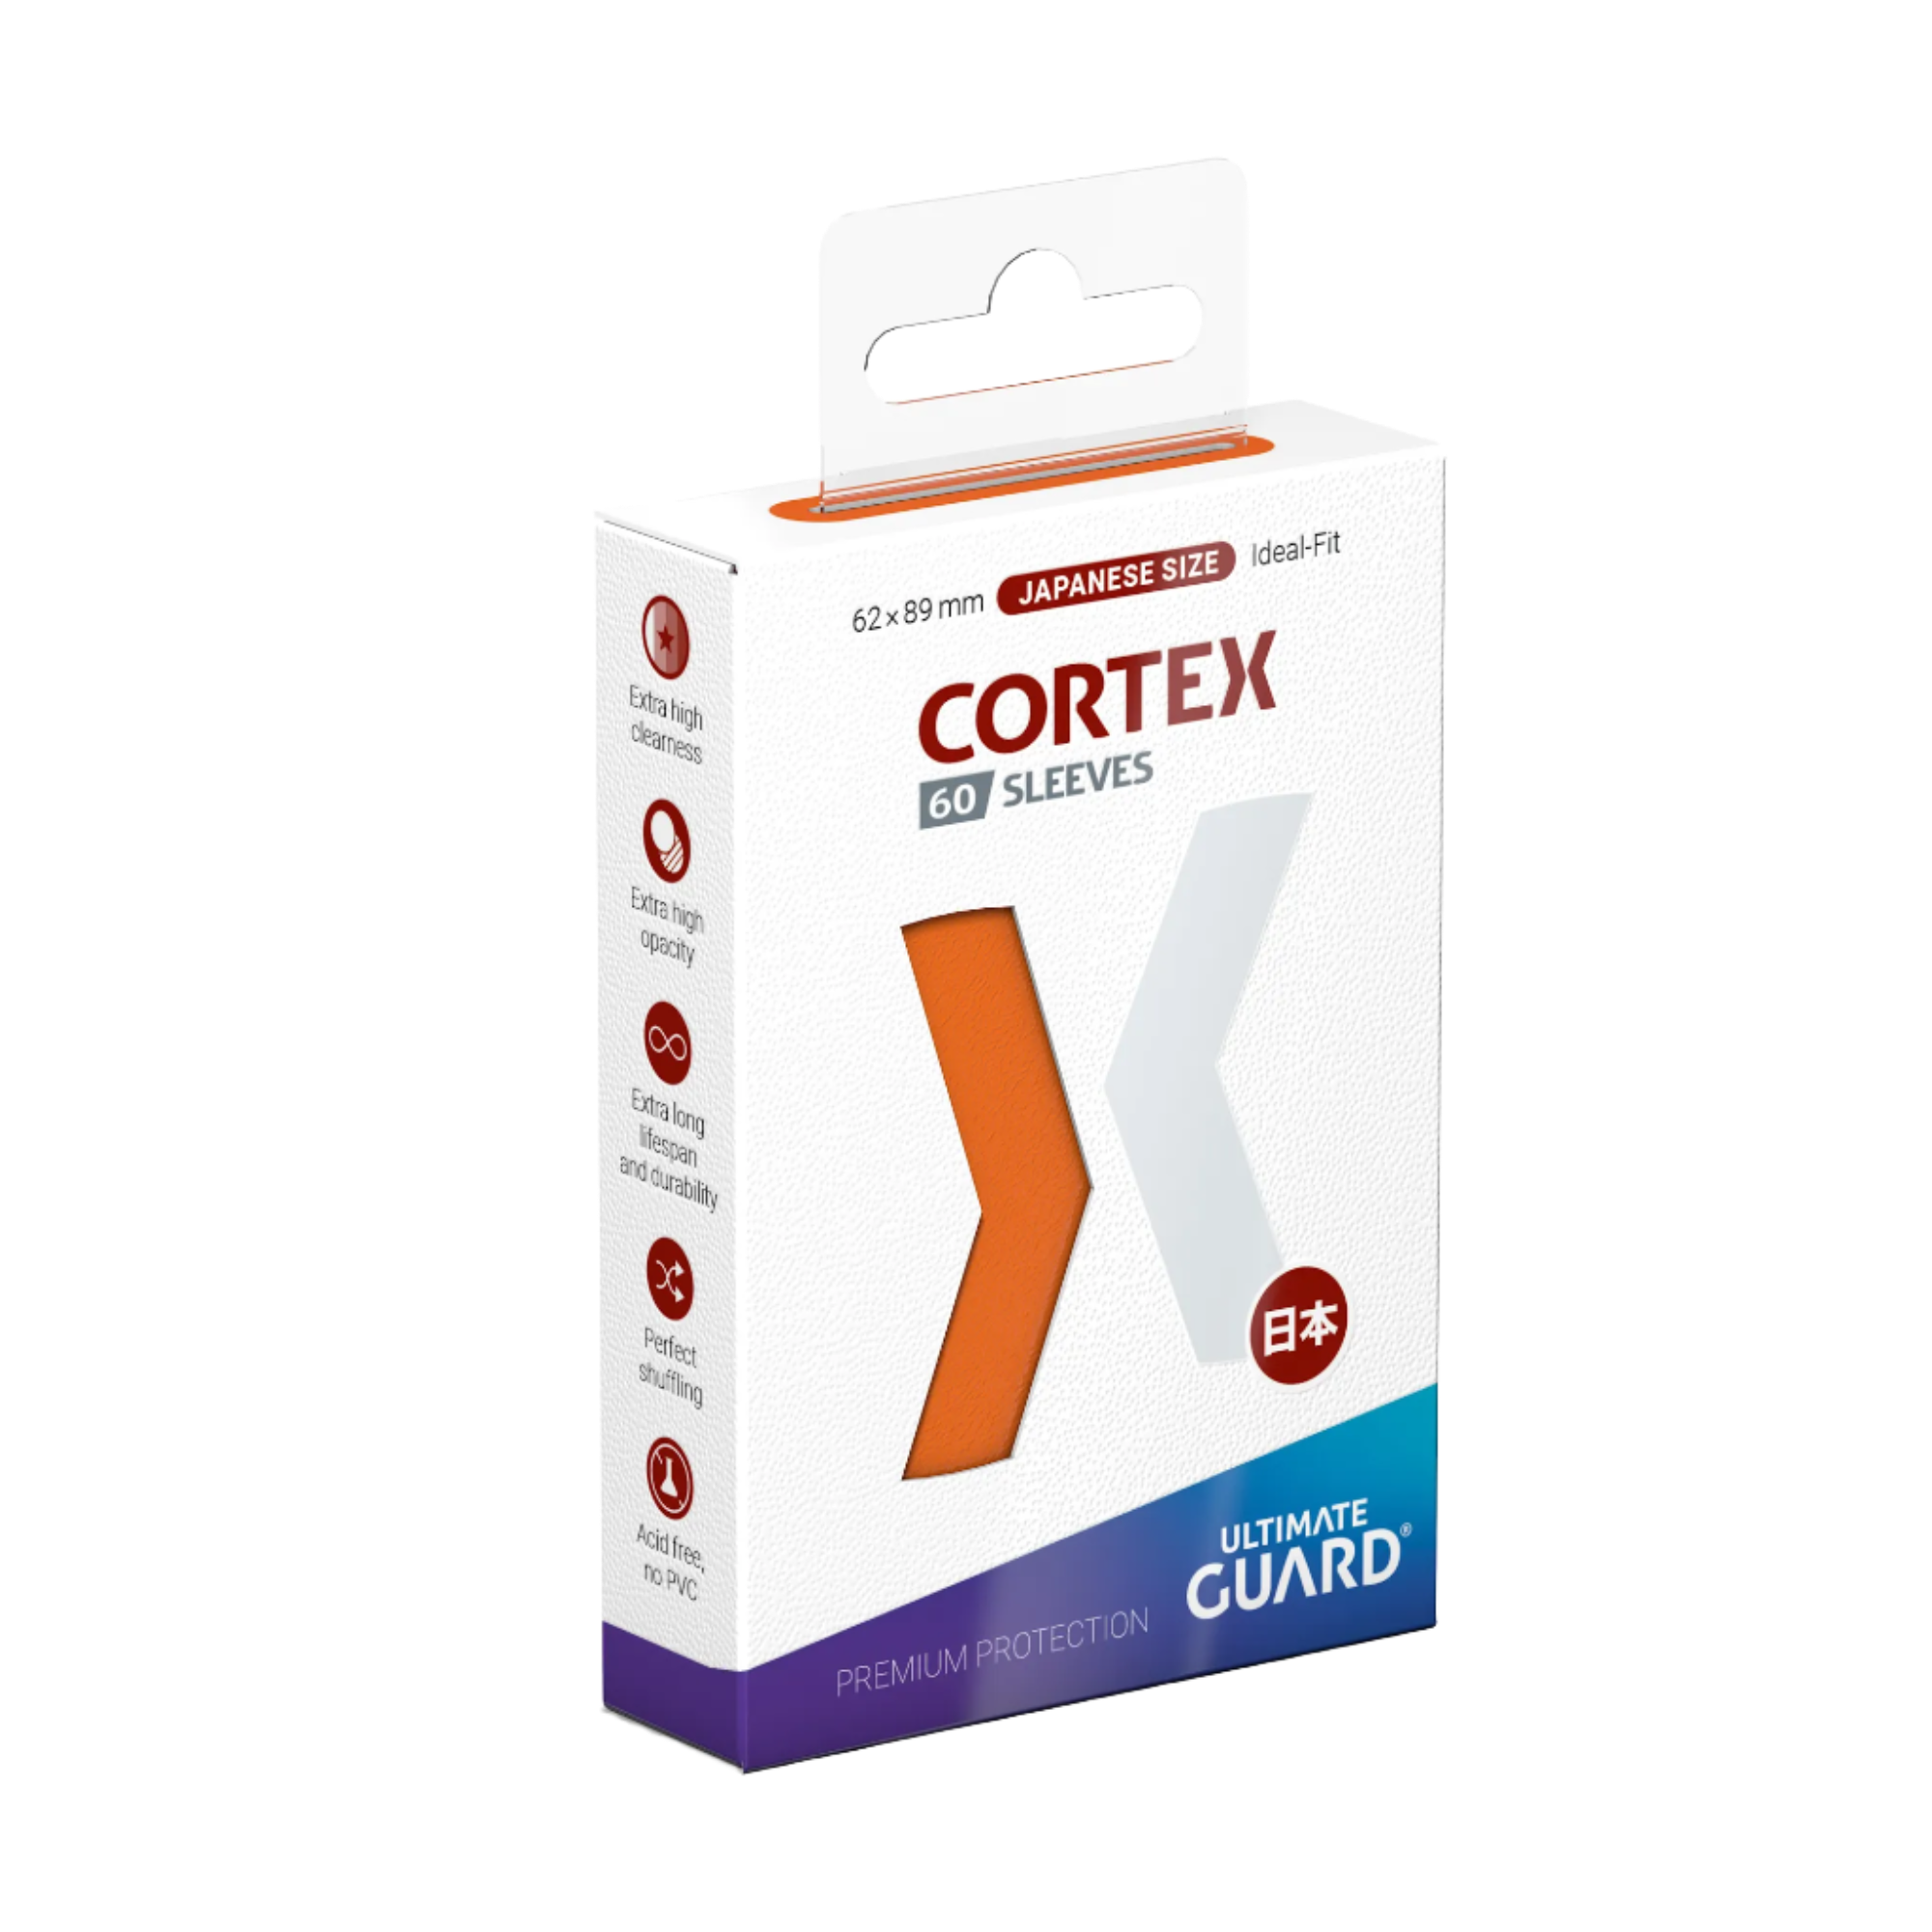 Ultimate Guard - Cortex Sleeves - Japanese Size - Ideal-Fit - Orange - 60pk